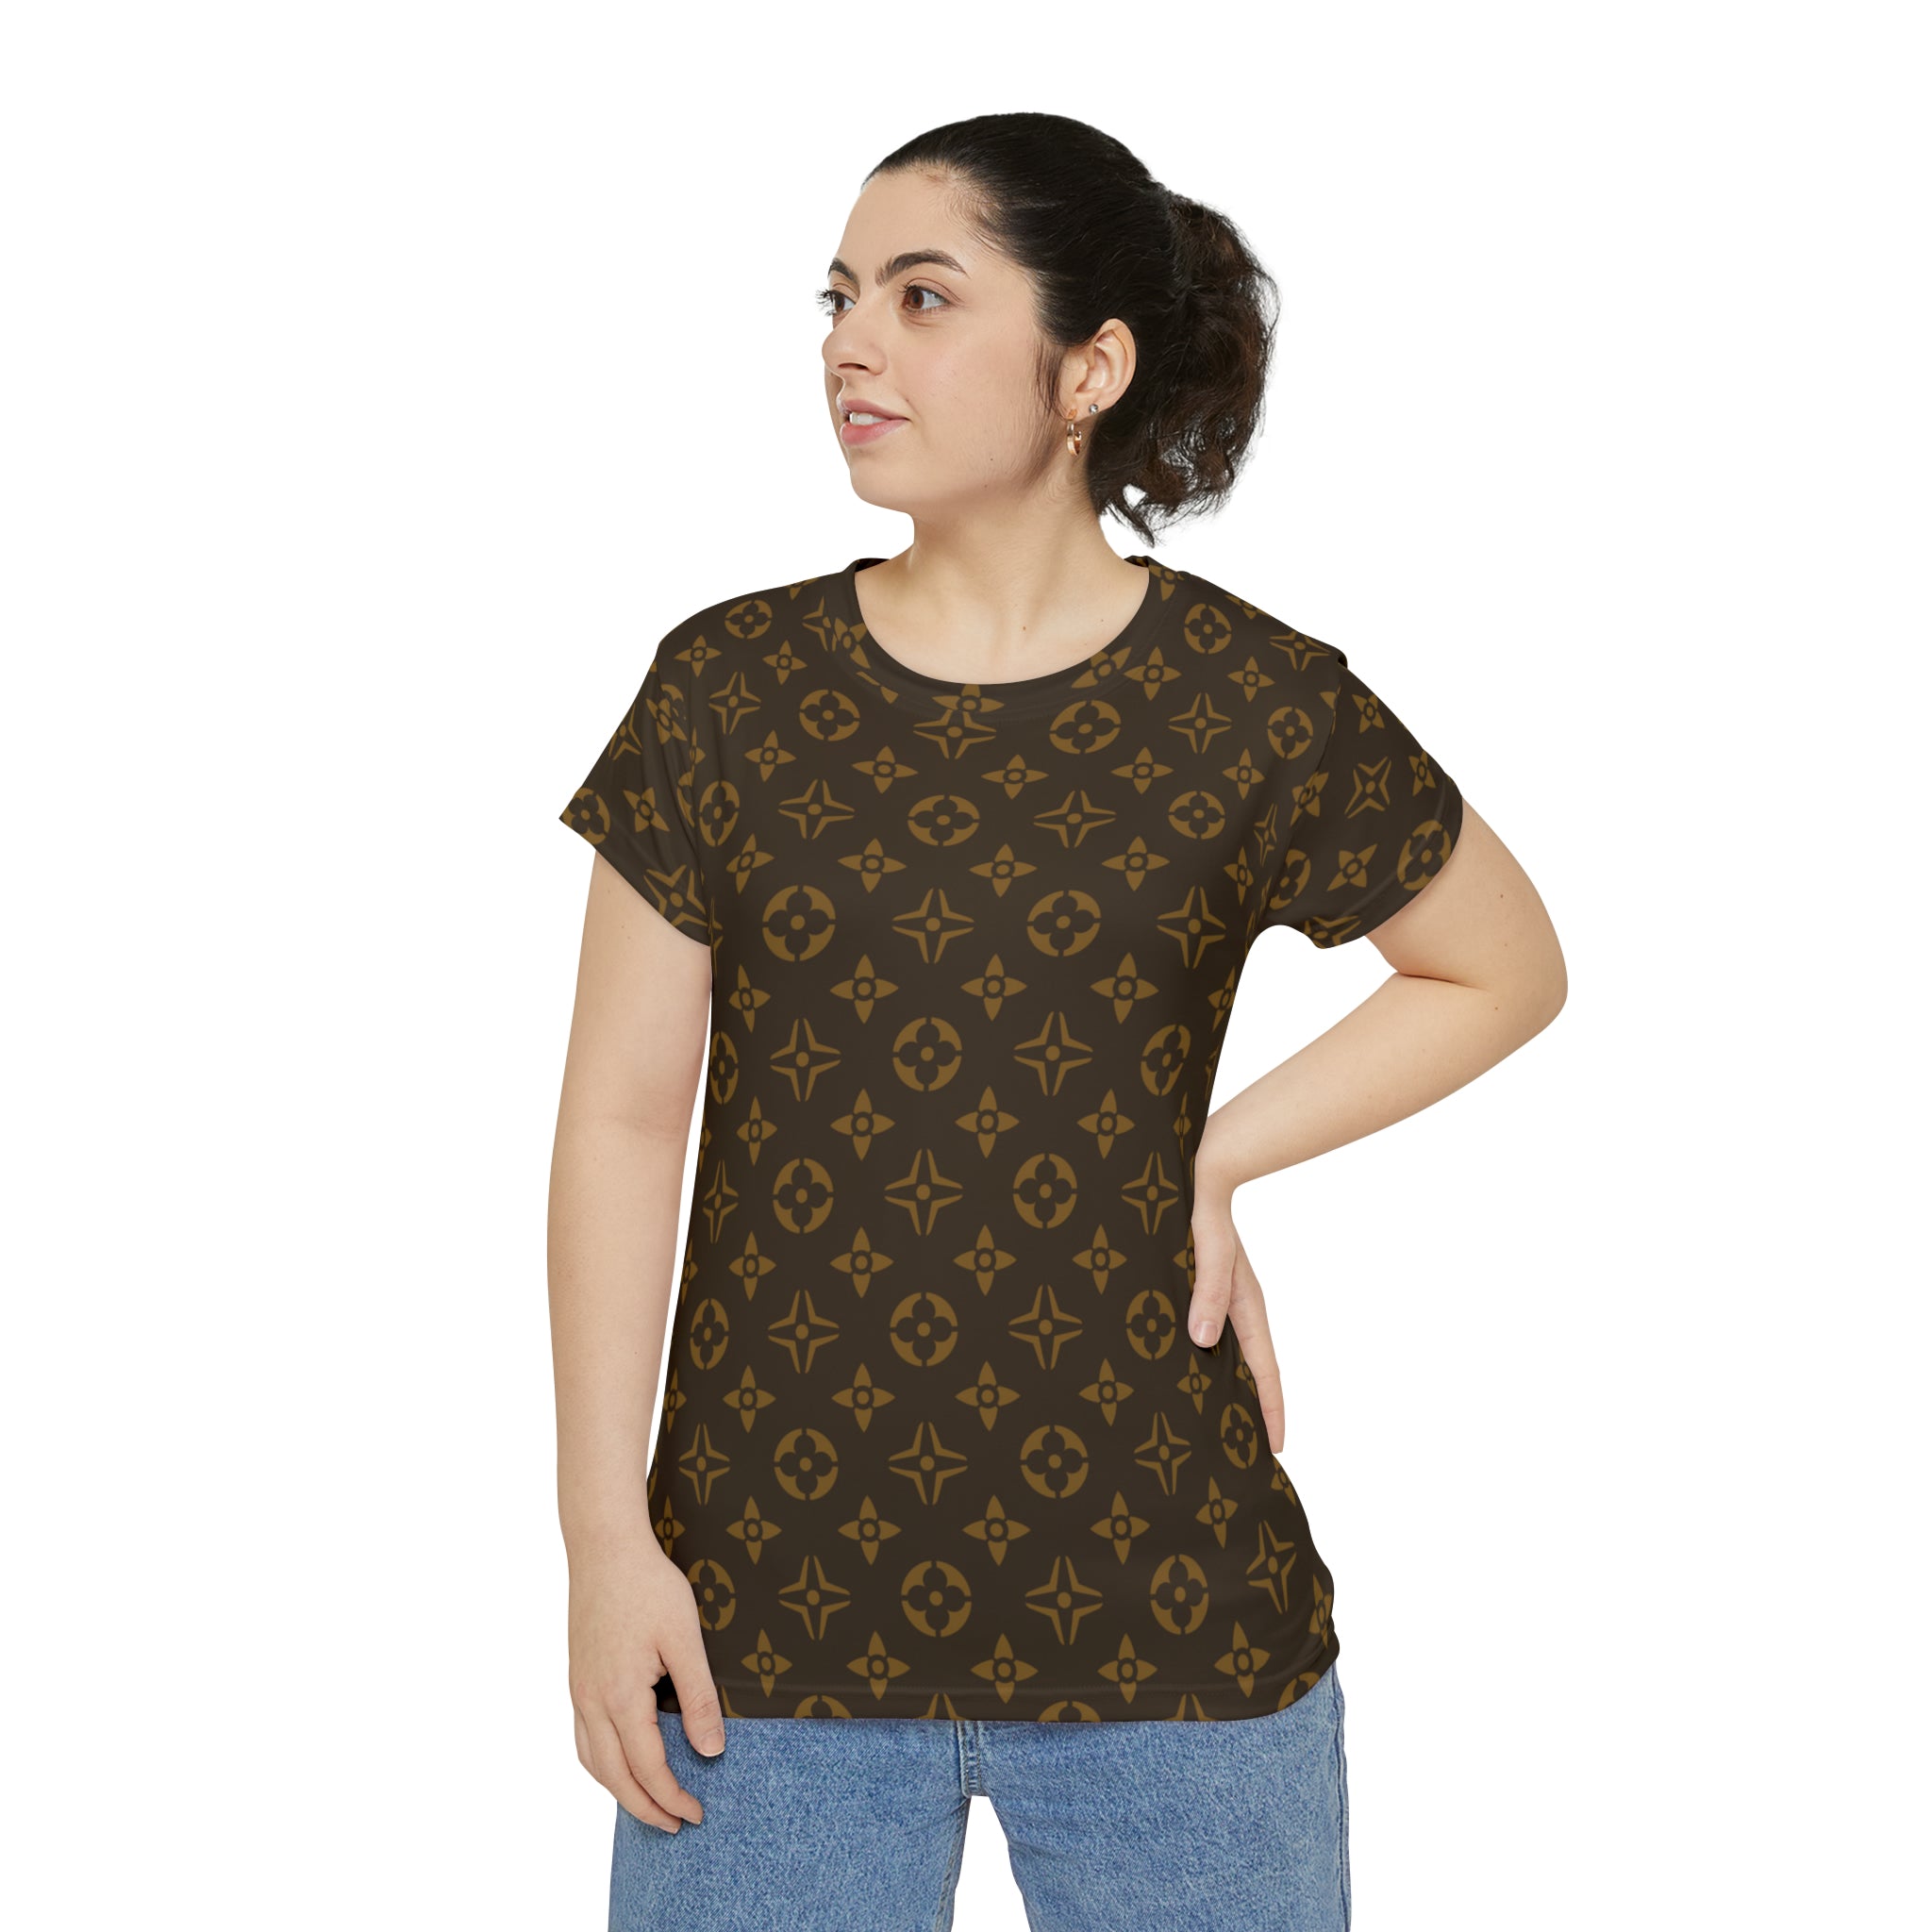  Abby Pattern Icons in Brown and Gold Women's Short Sleeve Shirt All Over Prints